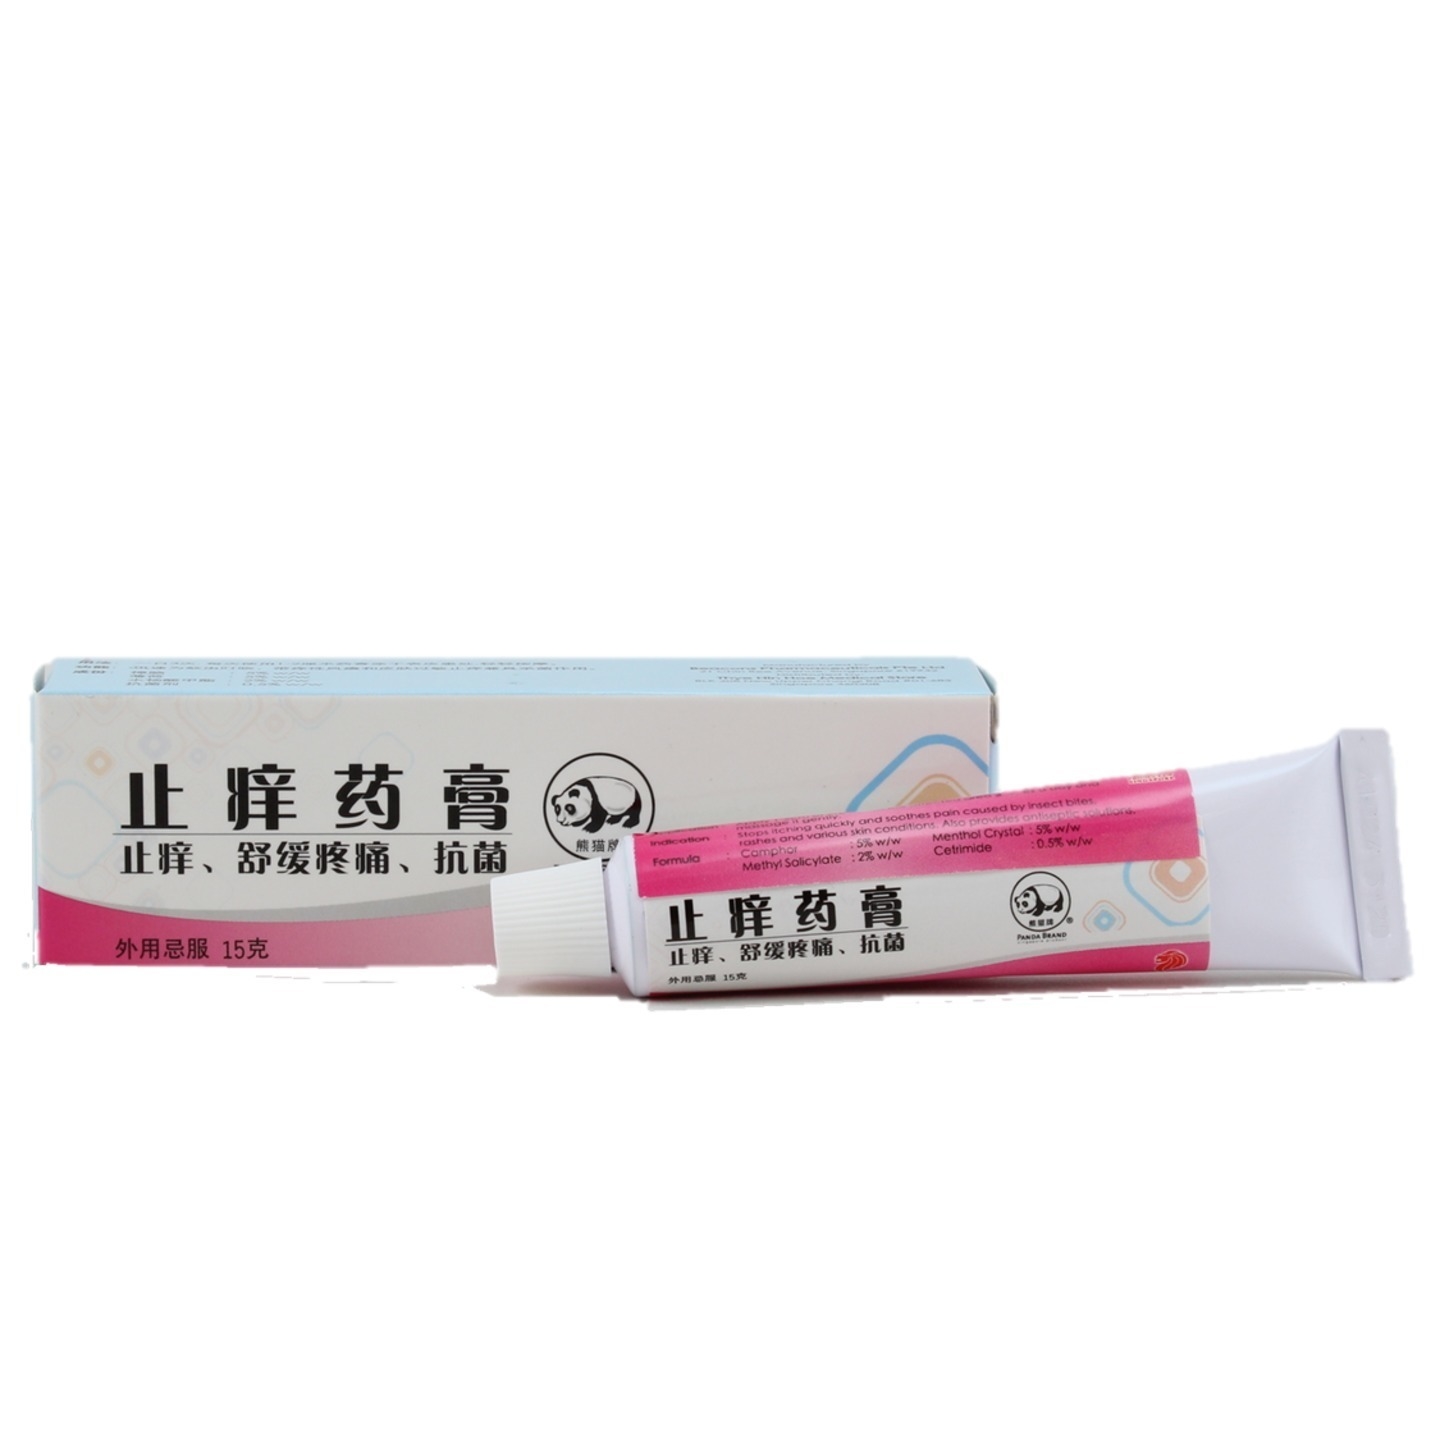 Anti-Itch Cream 止痒药膏 PROMOTION FOR 6